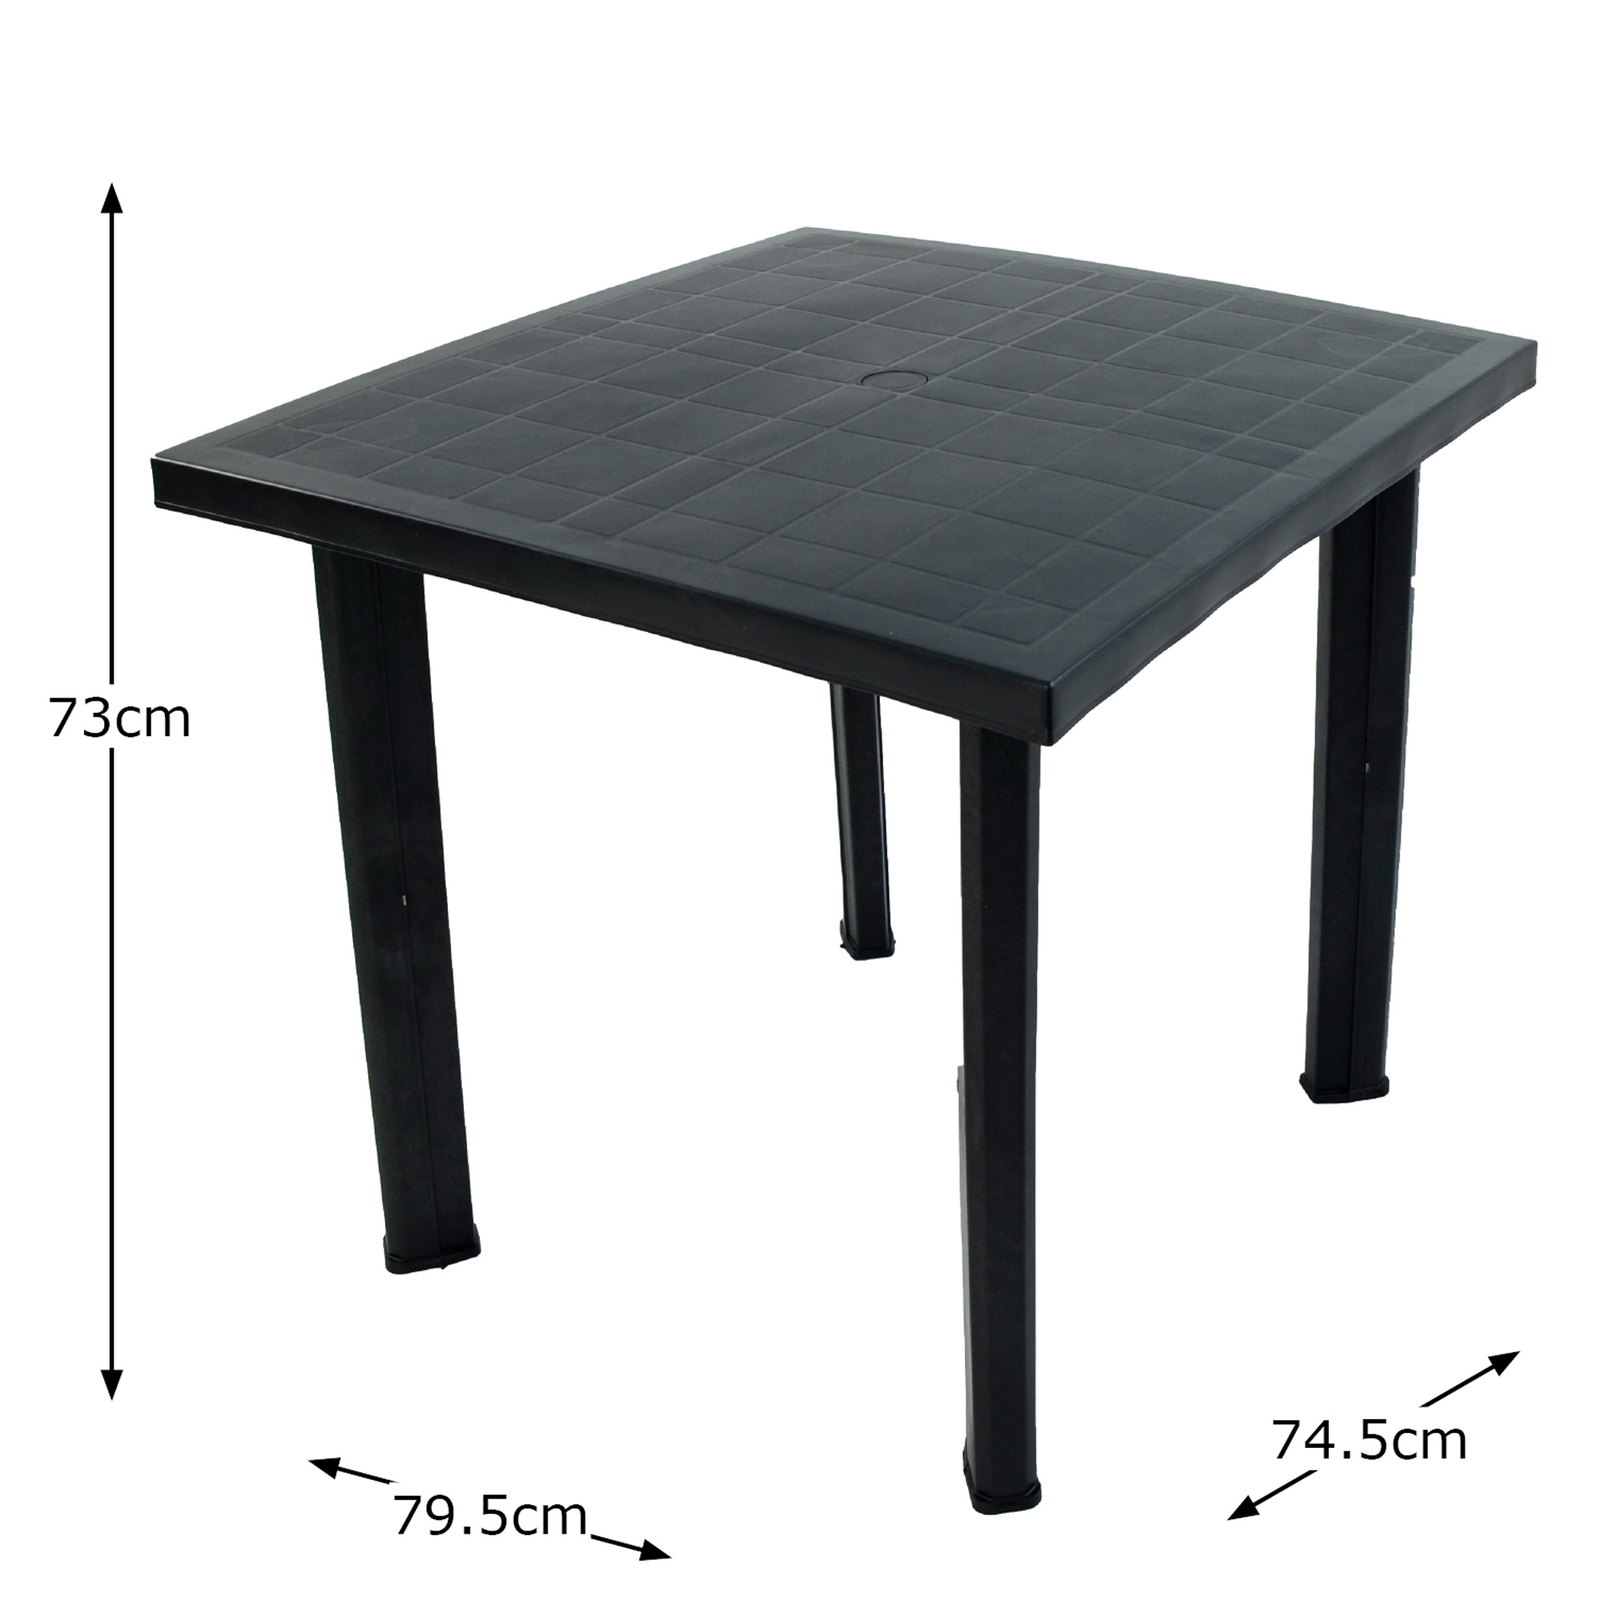 Trabella Rapino Square Table Anthracite Grey Tables Trabella Default Title  